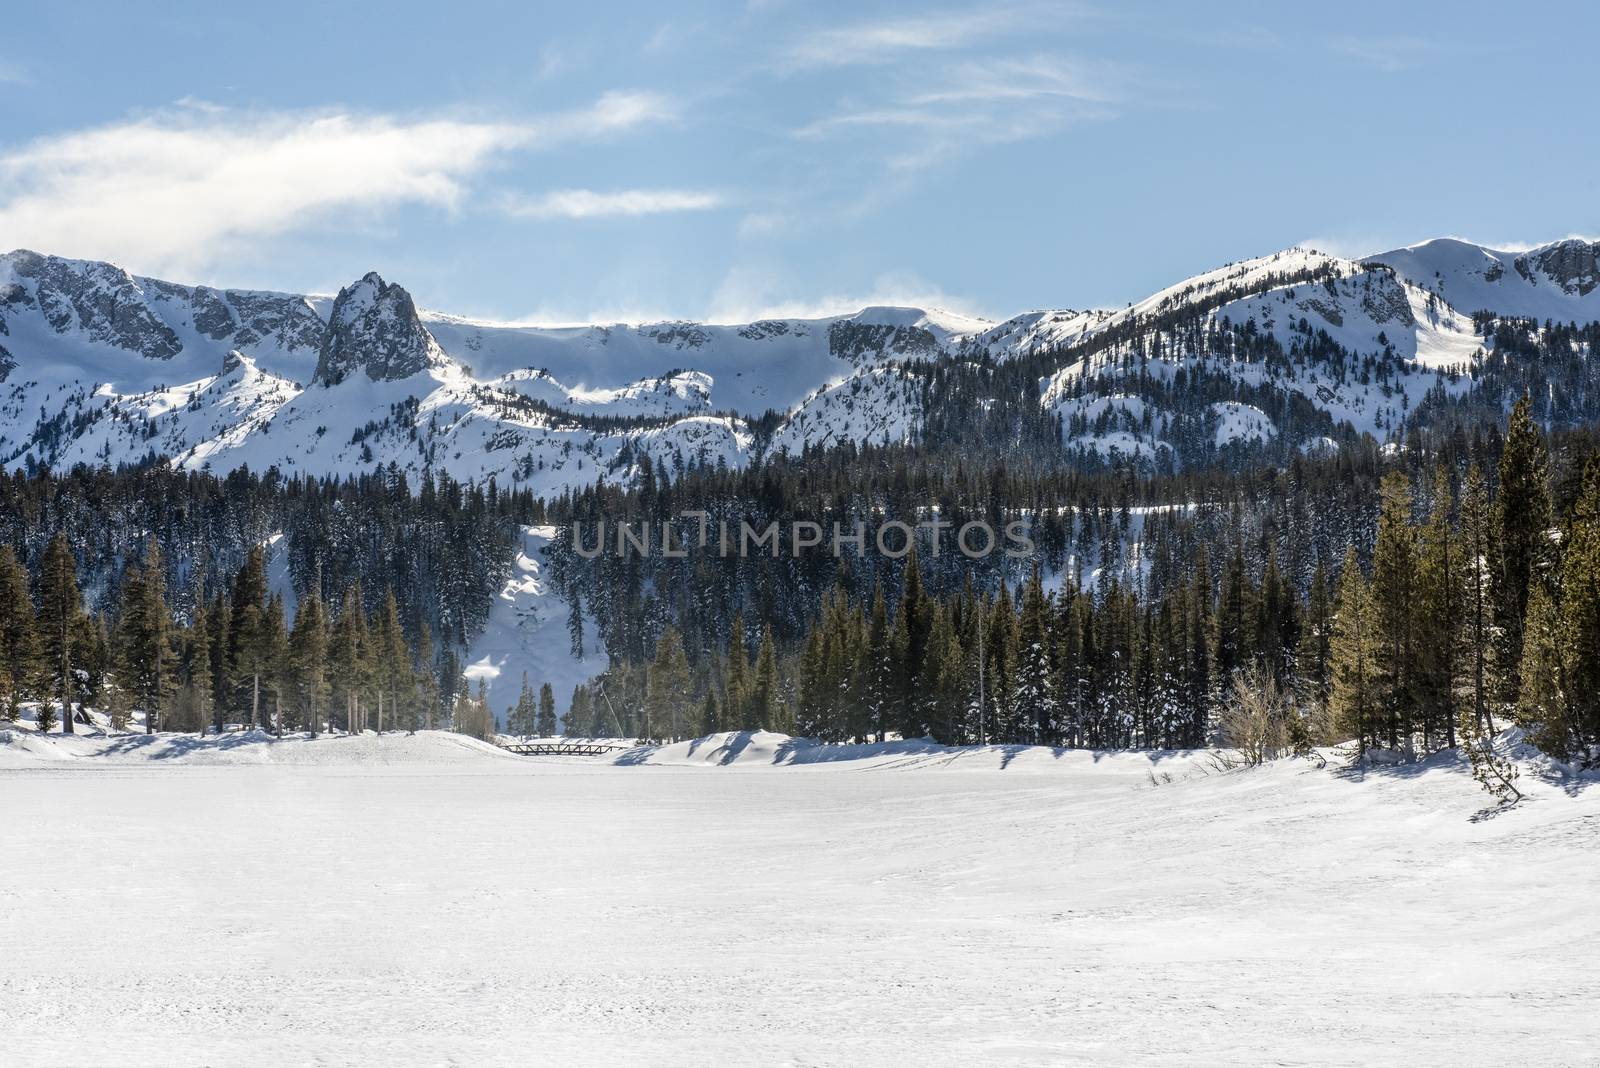 View of Twin Lakes frozen in winter with Mammoth Rock in background in Mammoth Lakes, California